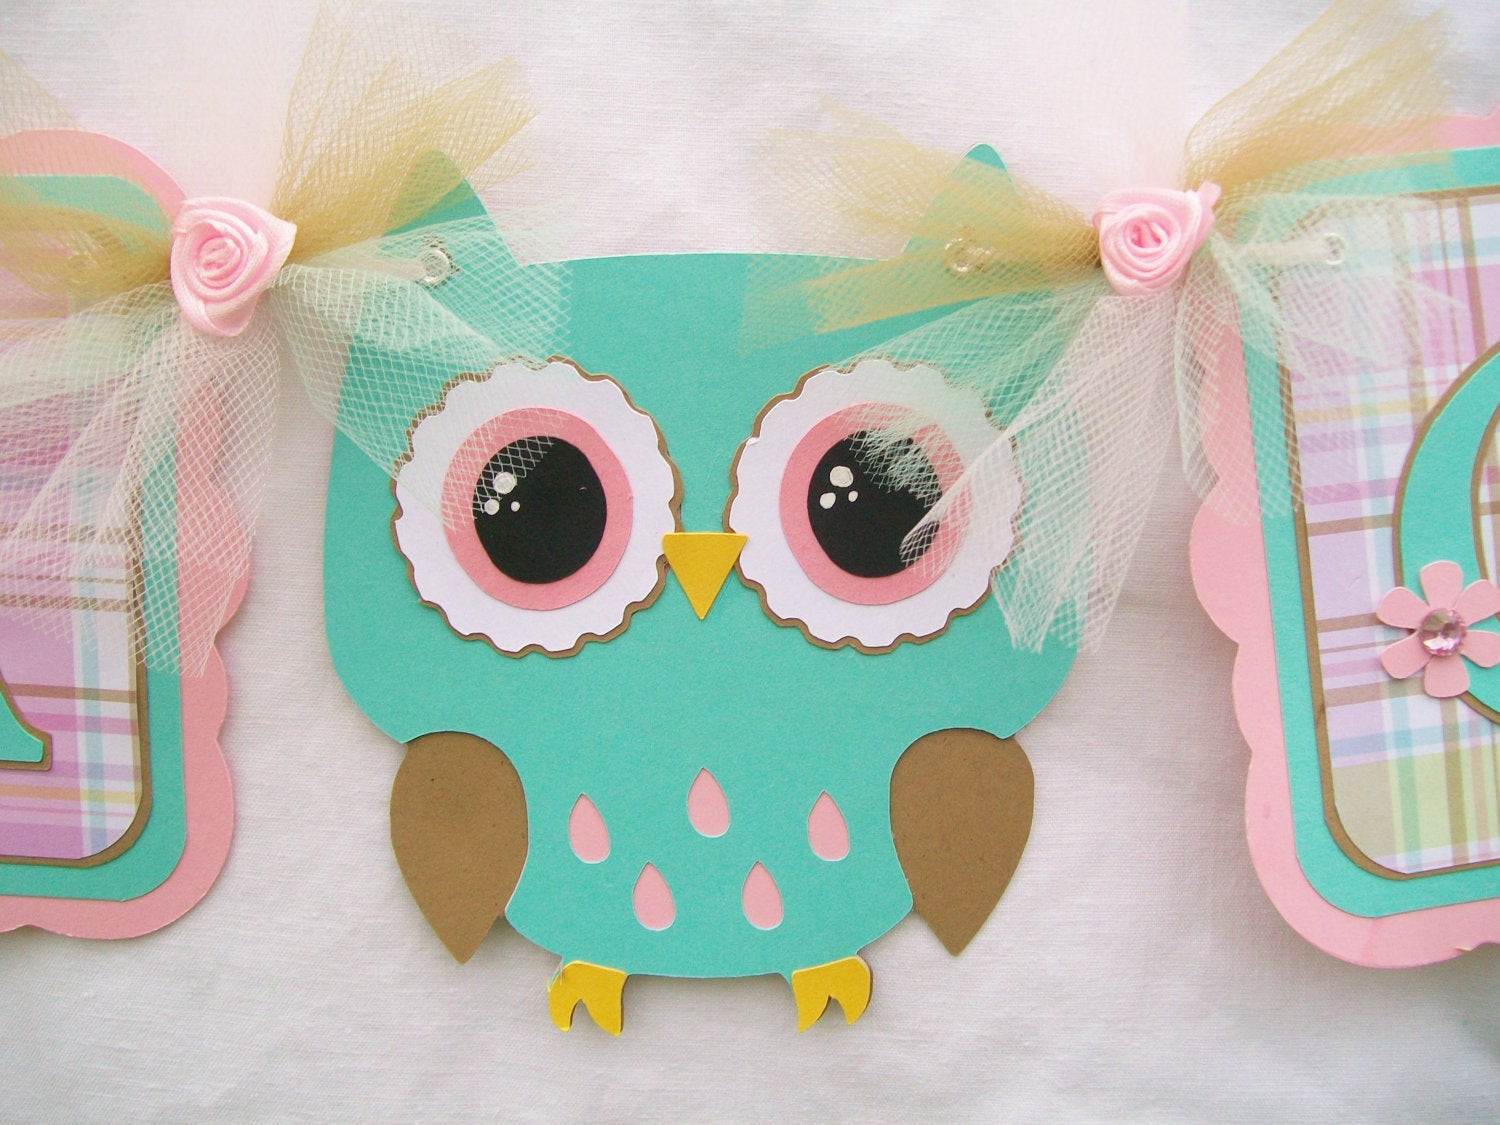 Owl Decor For Baby Shower
 Owl baby shower owl banner owl baby owl decorations baby